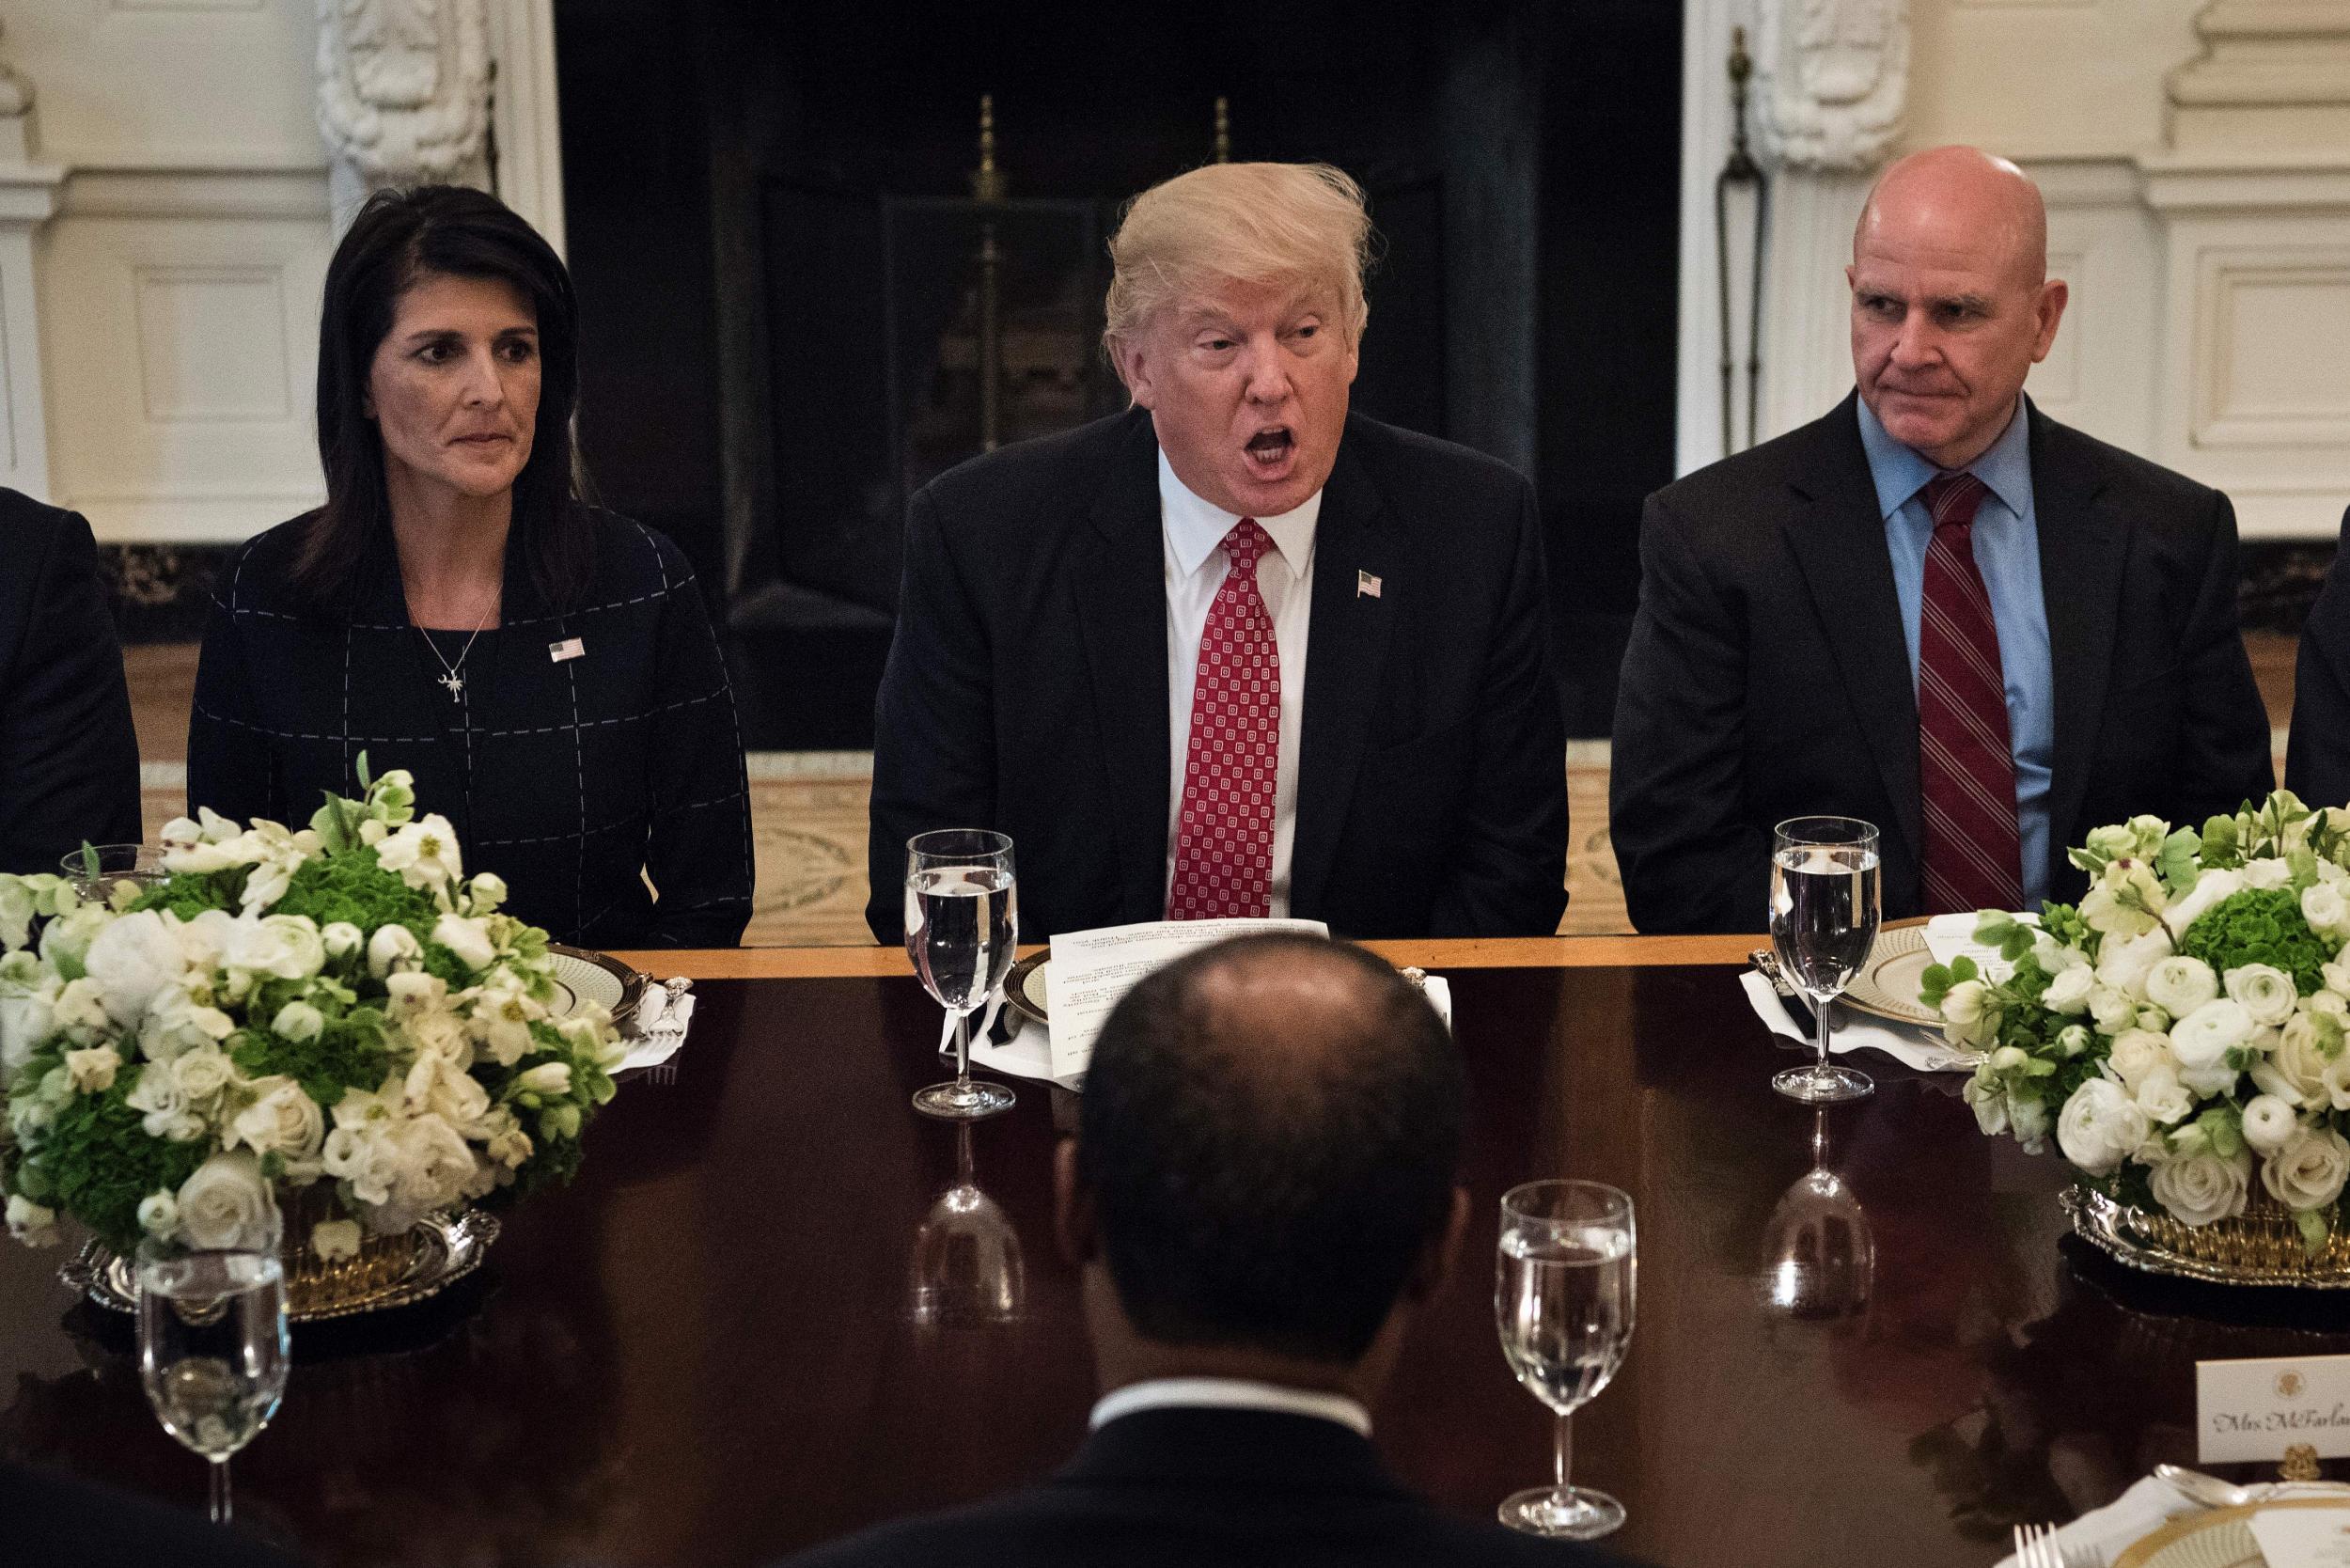 US Ambassador to the UN Nikki Haley and National Security Advisor HR McMaster listen as Donald Trump speaks before a working lunch with UN Security Council member nations at the White House